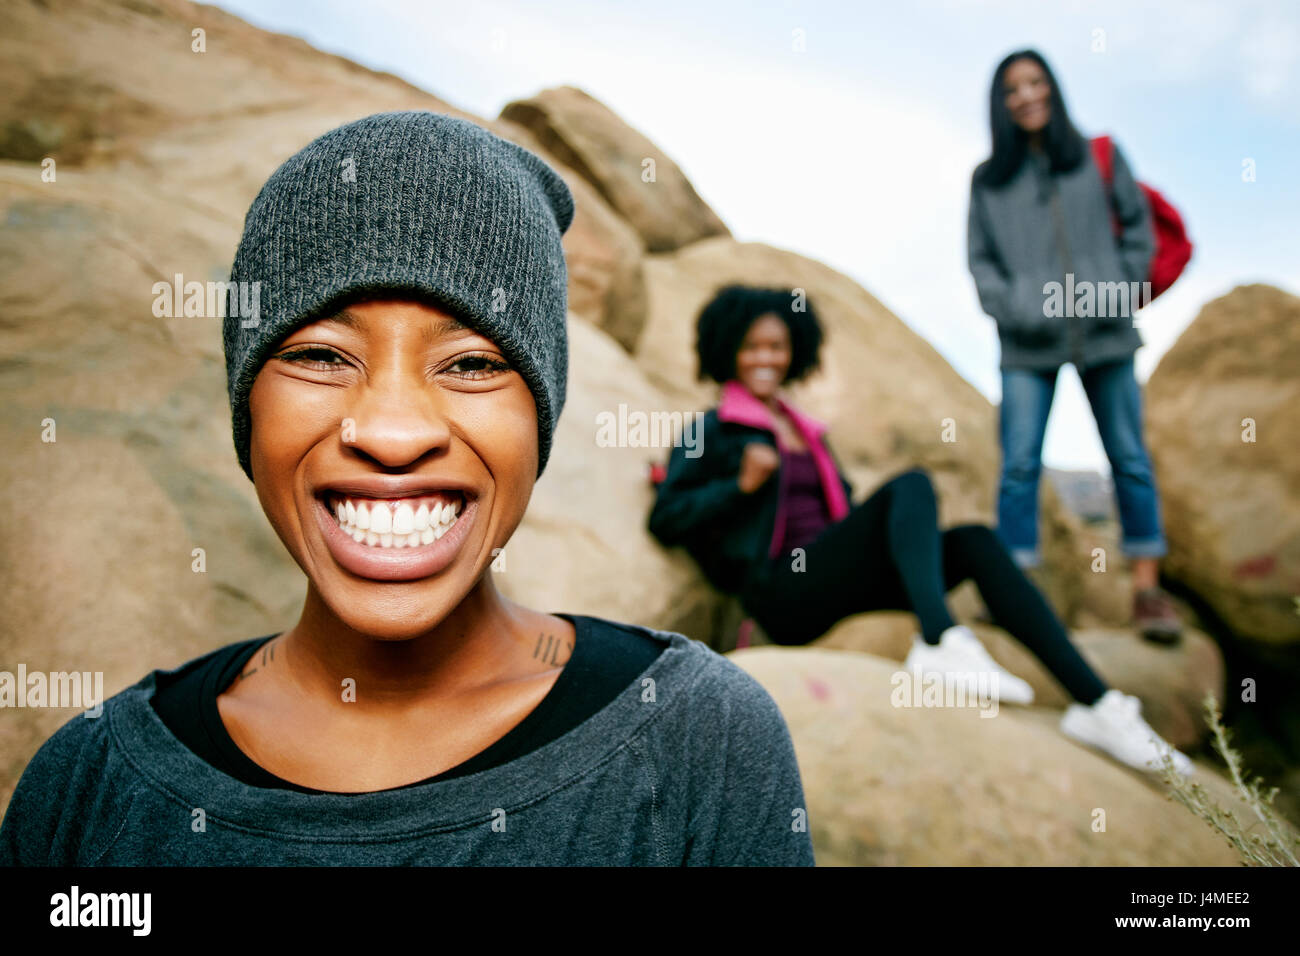 Portrait of smiling women posing on rock formation Banque D'Images